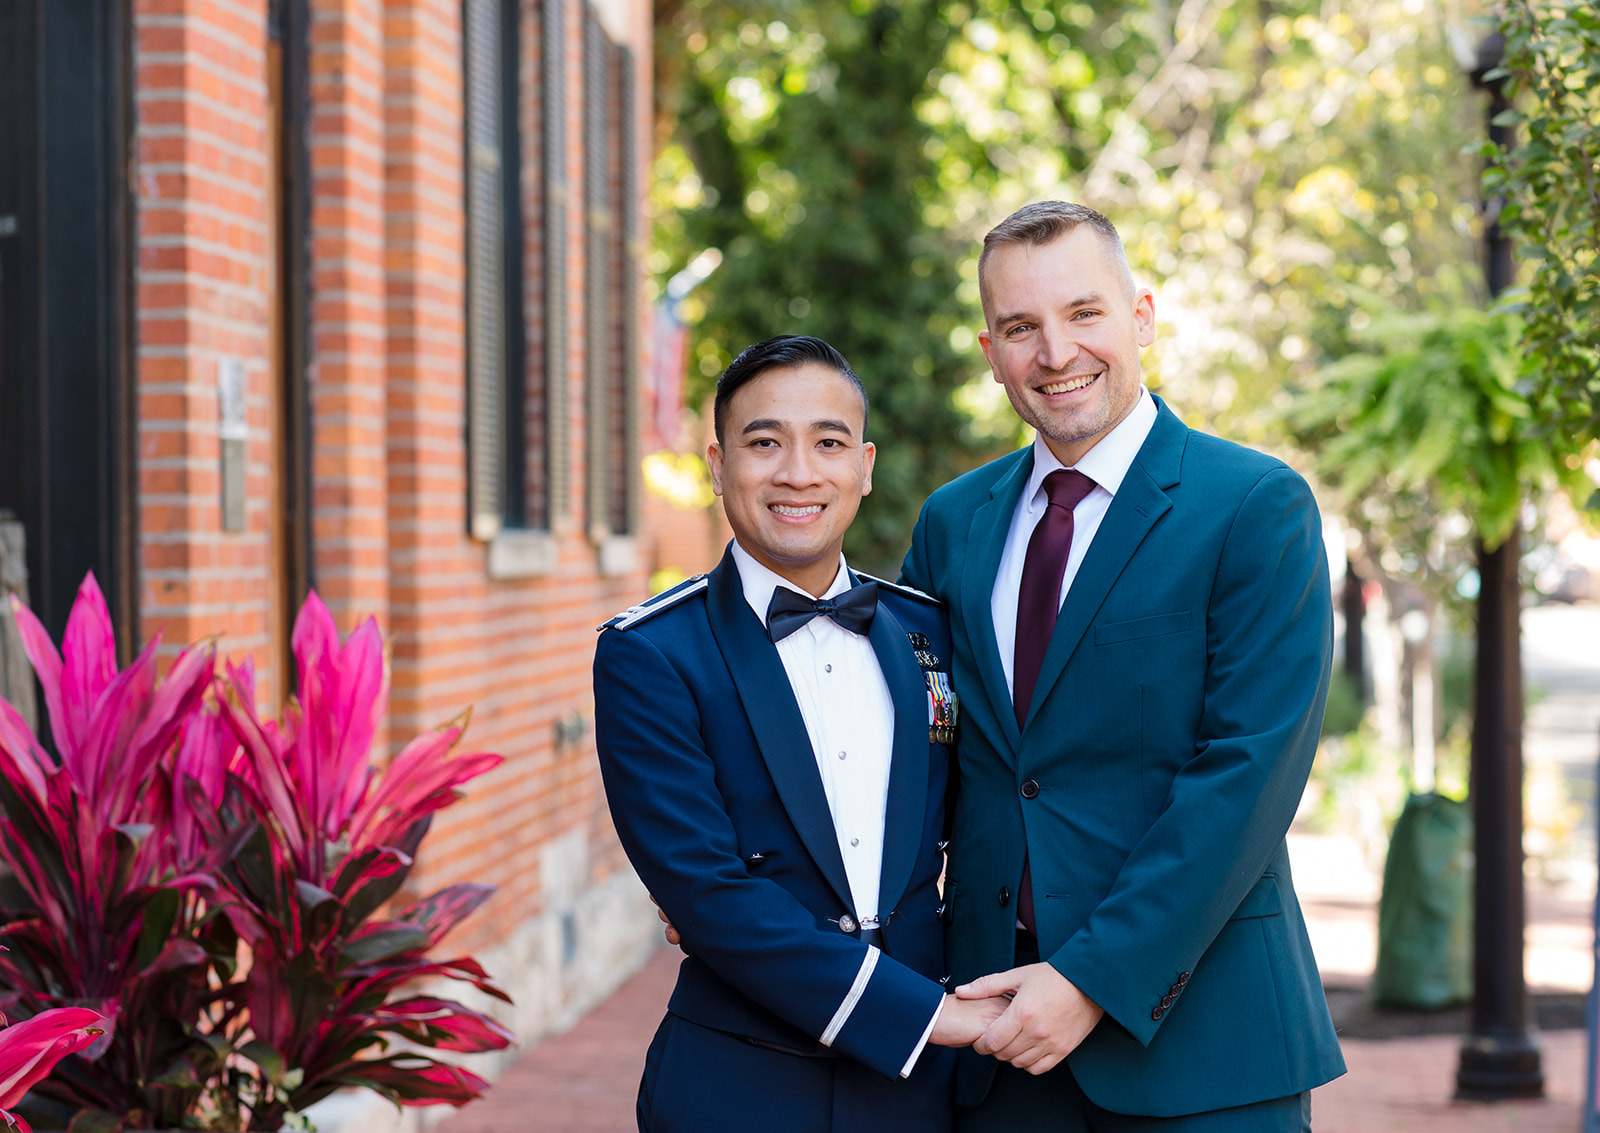 Two grooms hold hands and smile at the camera